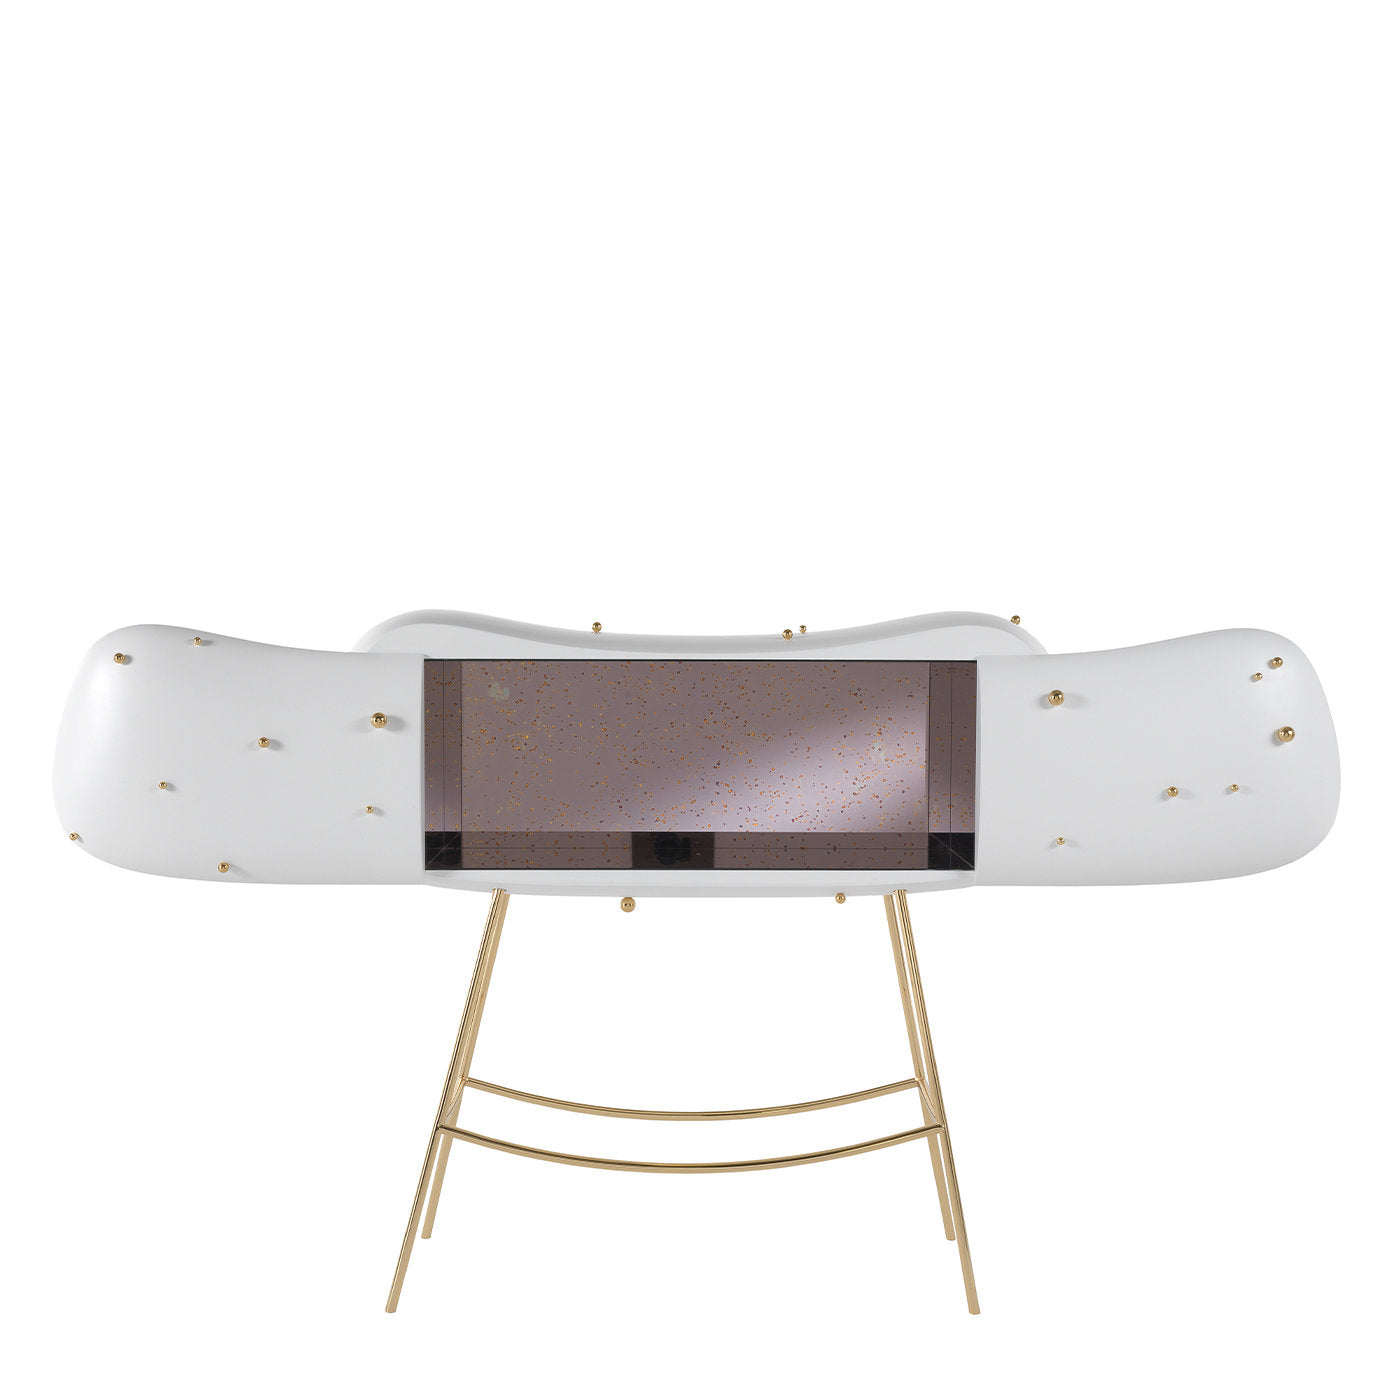 Justine Cabinet Limited Edition by Matteo Cibic - Alternative view 3